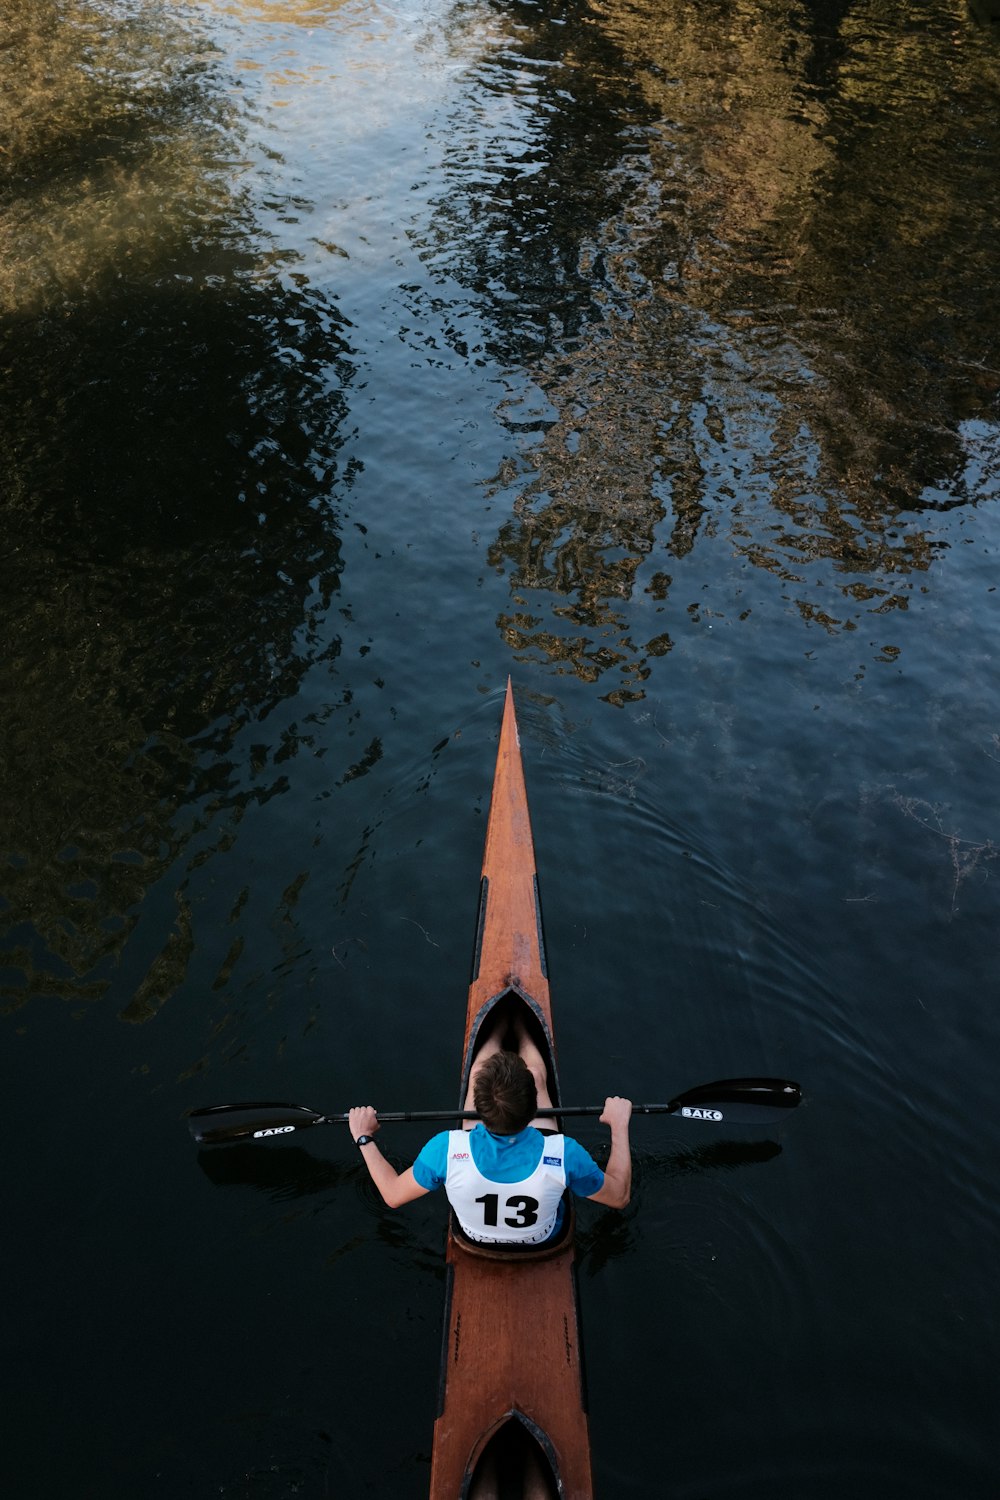 woman in blue and white wetsuit holding orange surfboard on water